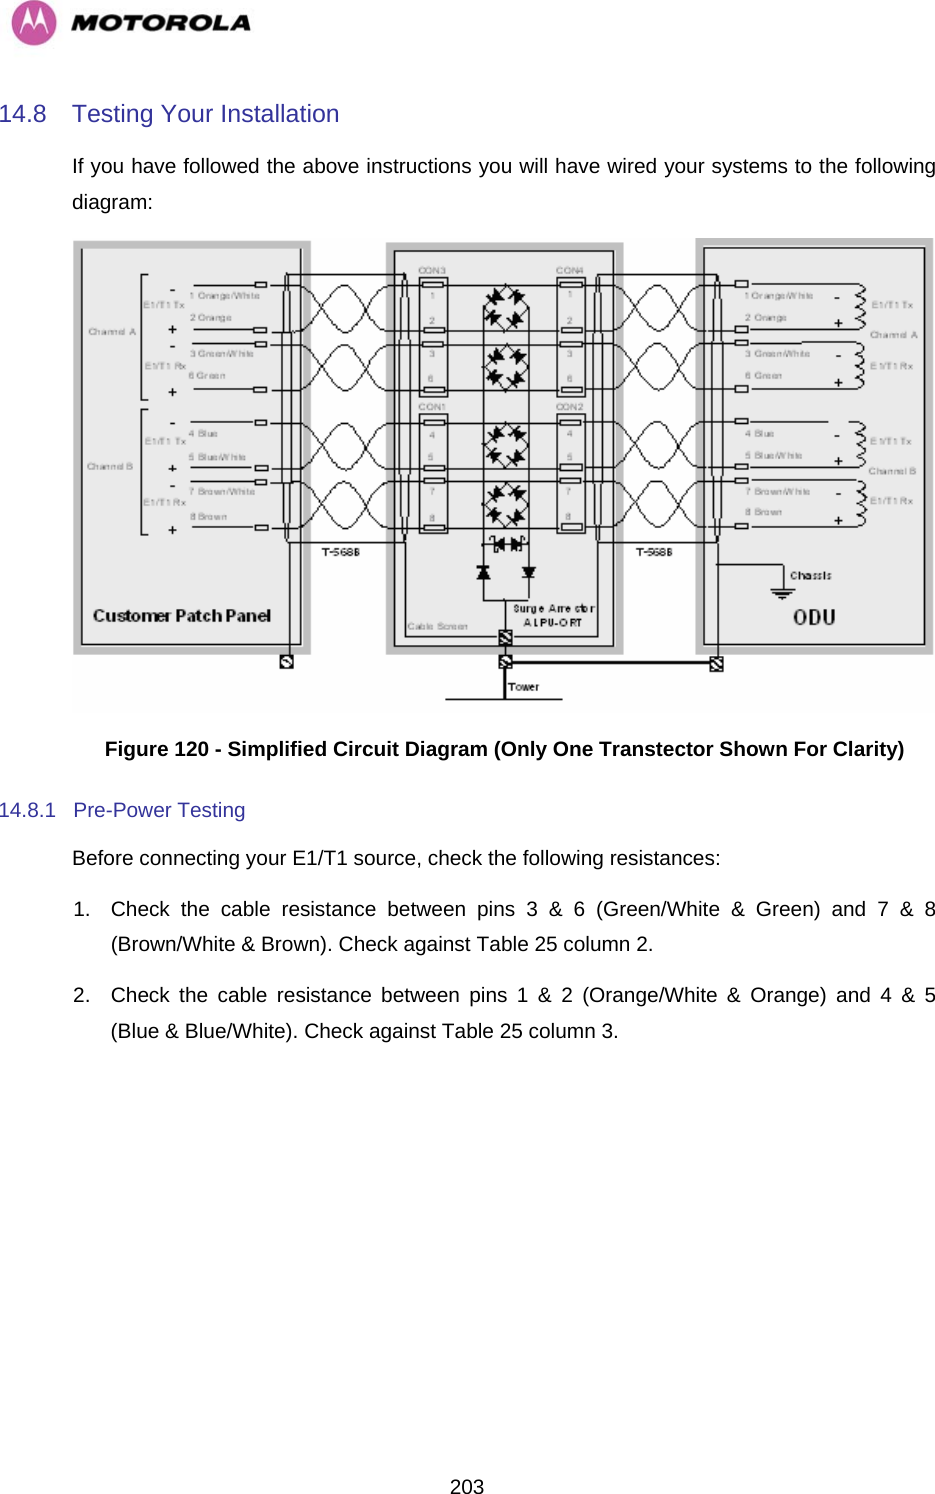   20314.8  Testing Your Installation If you have followed the above instructions you will have wired your systems to the following diagram:  Figure 120 - Simplified Circuit Diagram (Only One Transtector Shown For Clarity) 14.8.1 Pre-Power Testing Before connecting your E1/T1 source, check the following resistances: 1.  Check the cable resistance between pins 3 &amp; 6 (Green/White &amp; Green) and 7 &amp; 8 (Brown/White &amp; Brown). Check against Table 25 column 2. 2.  Check the cable resistance between pins 1 &amp; 2 (Orange/White &amp; Orange) and 4 &amp; 5 (Blue &amp; Blue/White). Check against Table 25 column 3. 